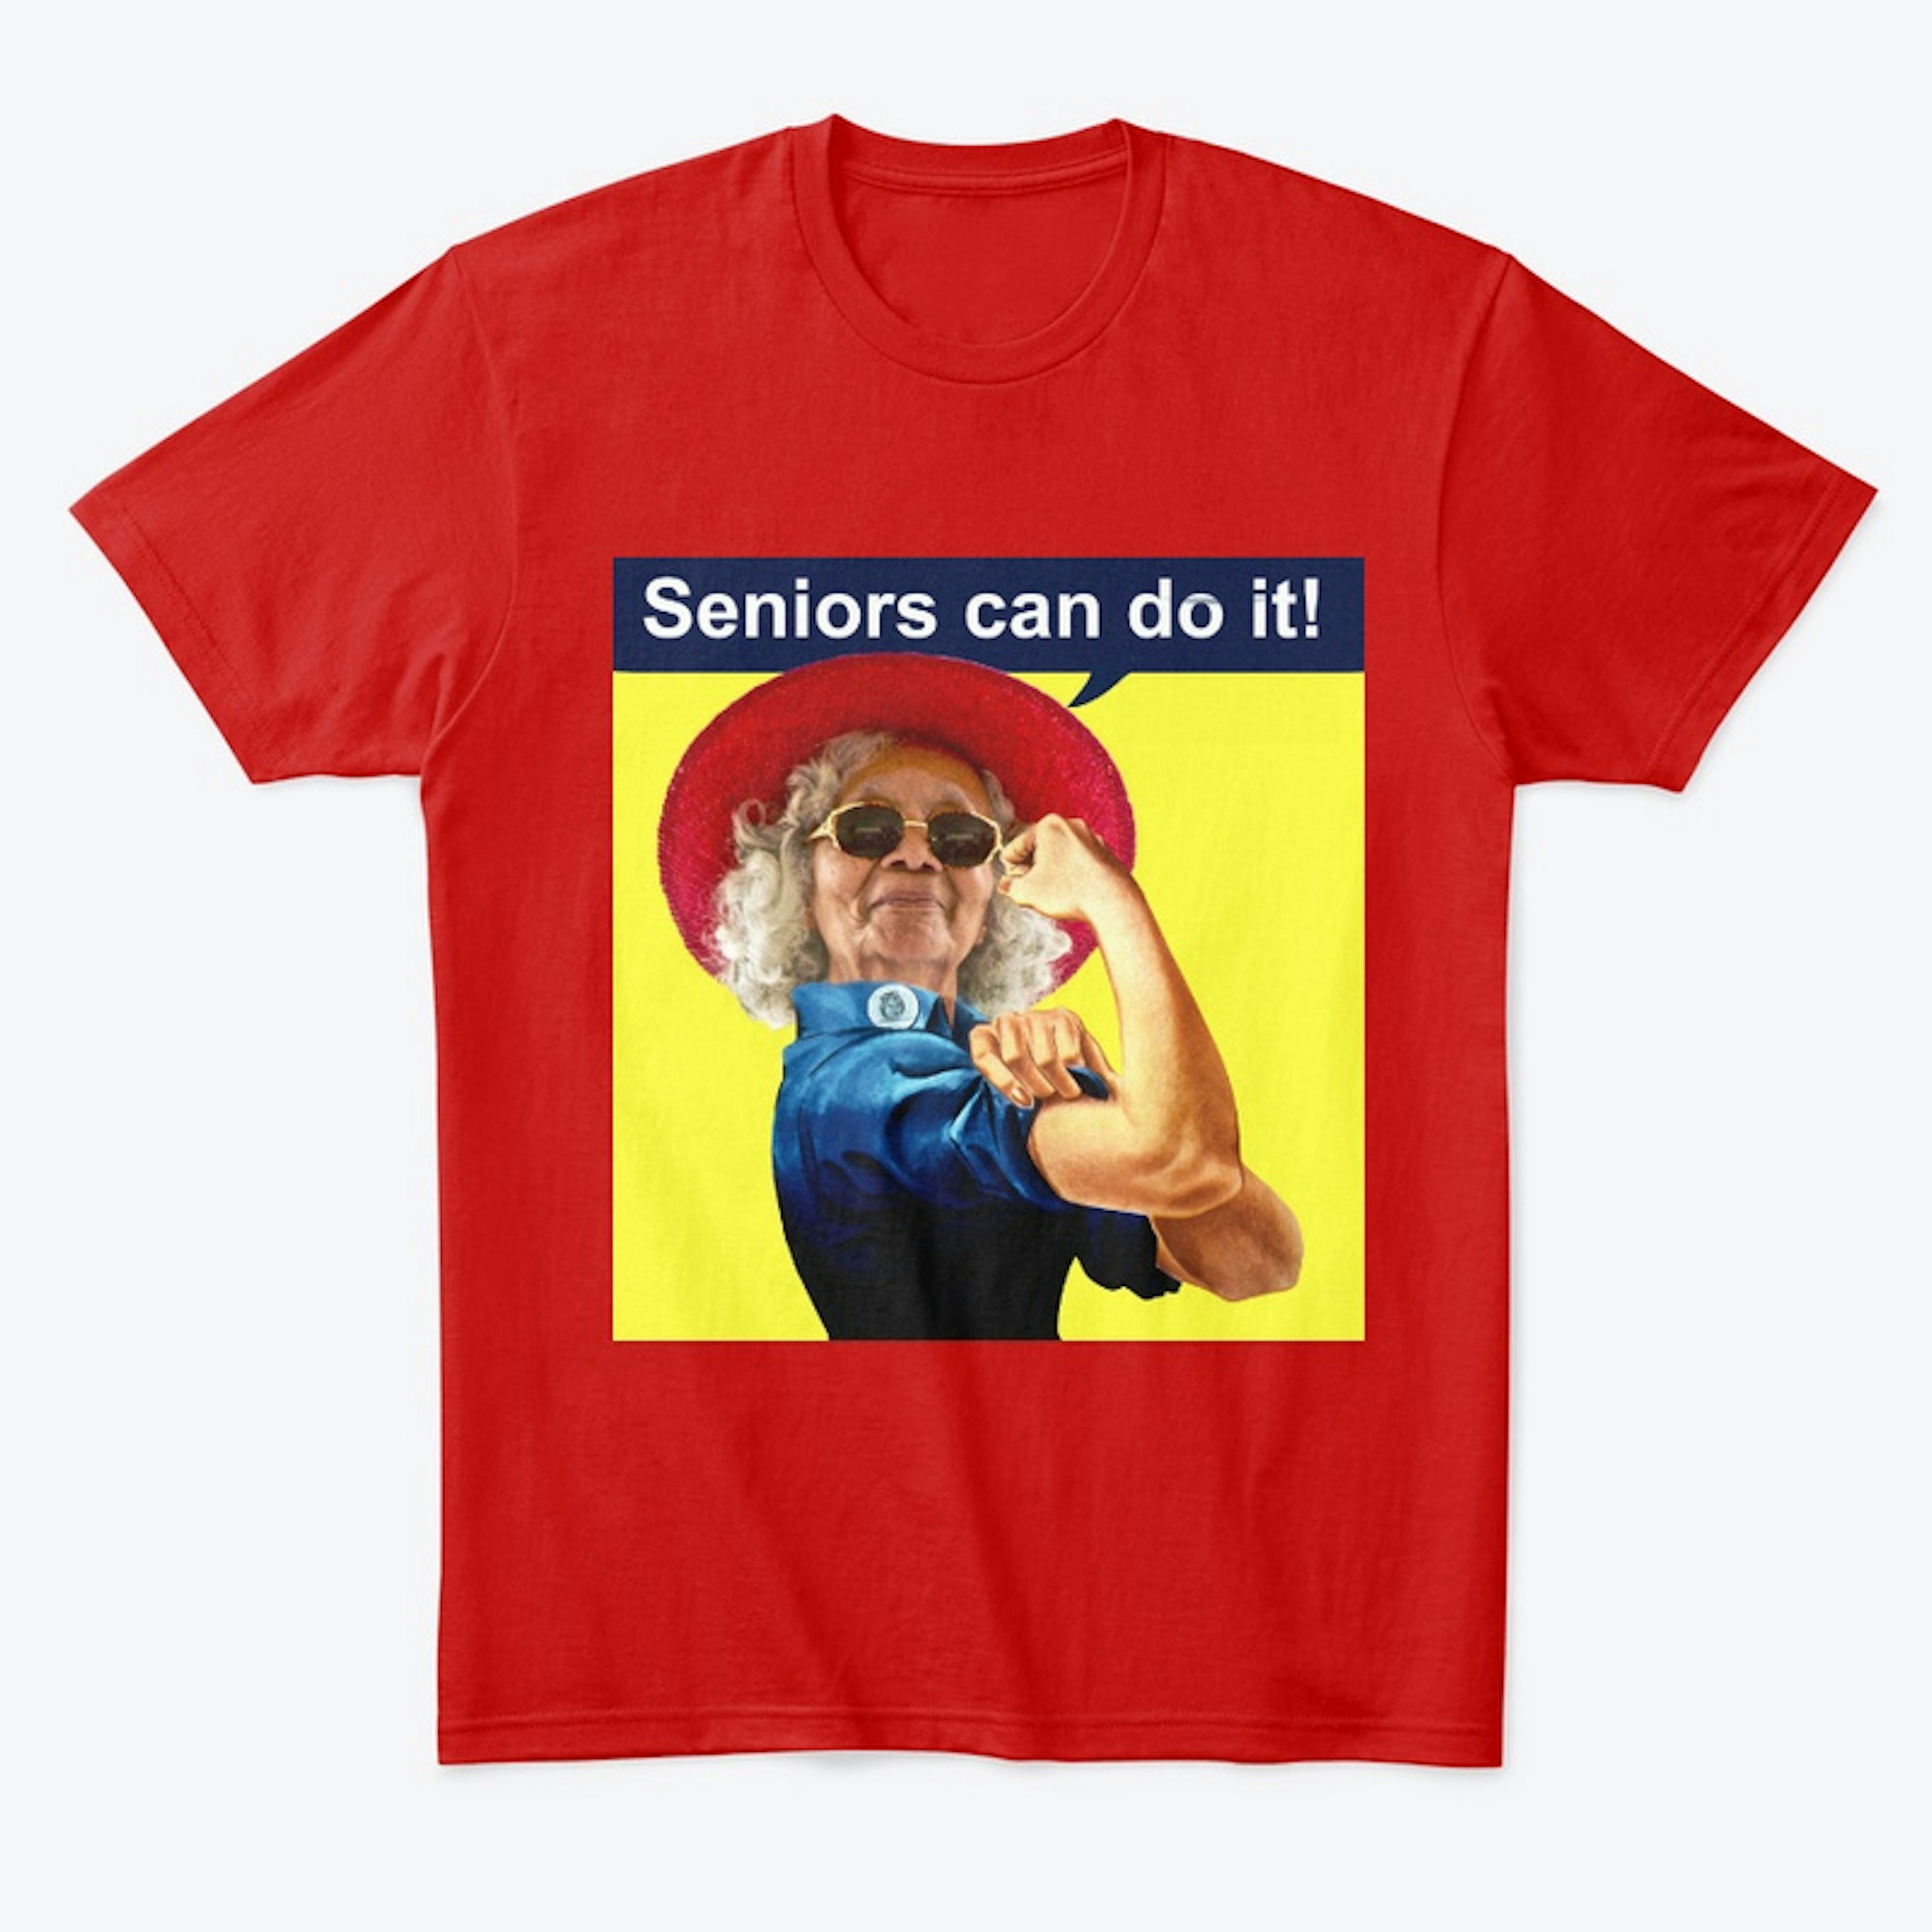 Senior's Can Do It!